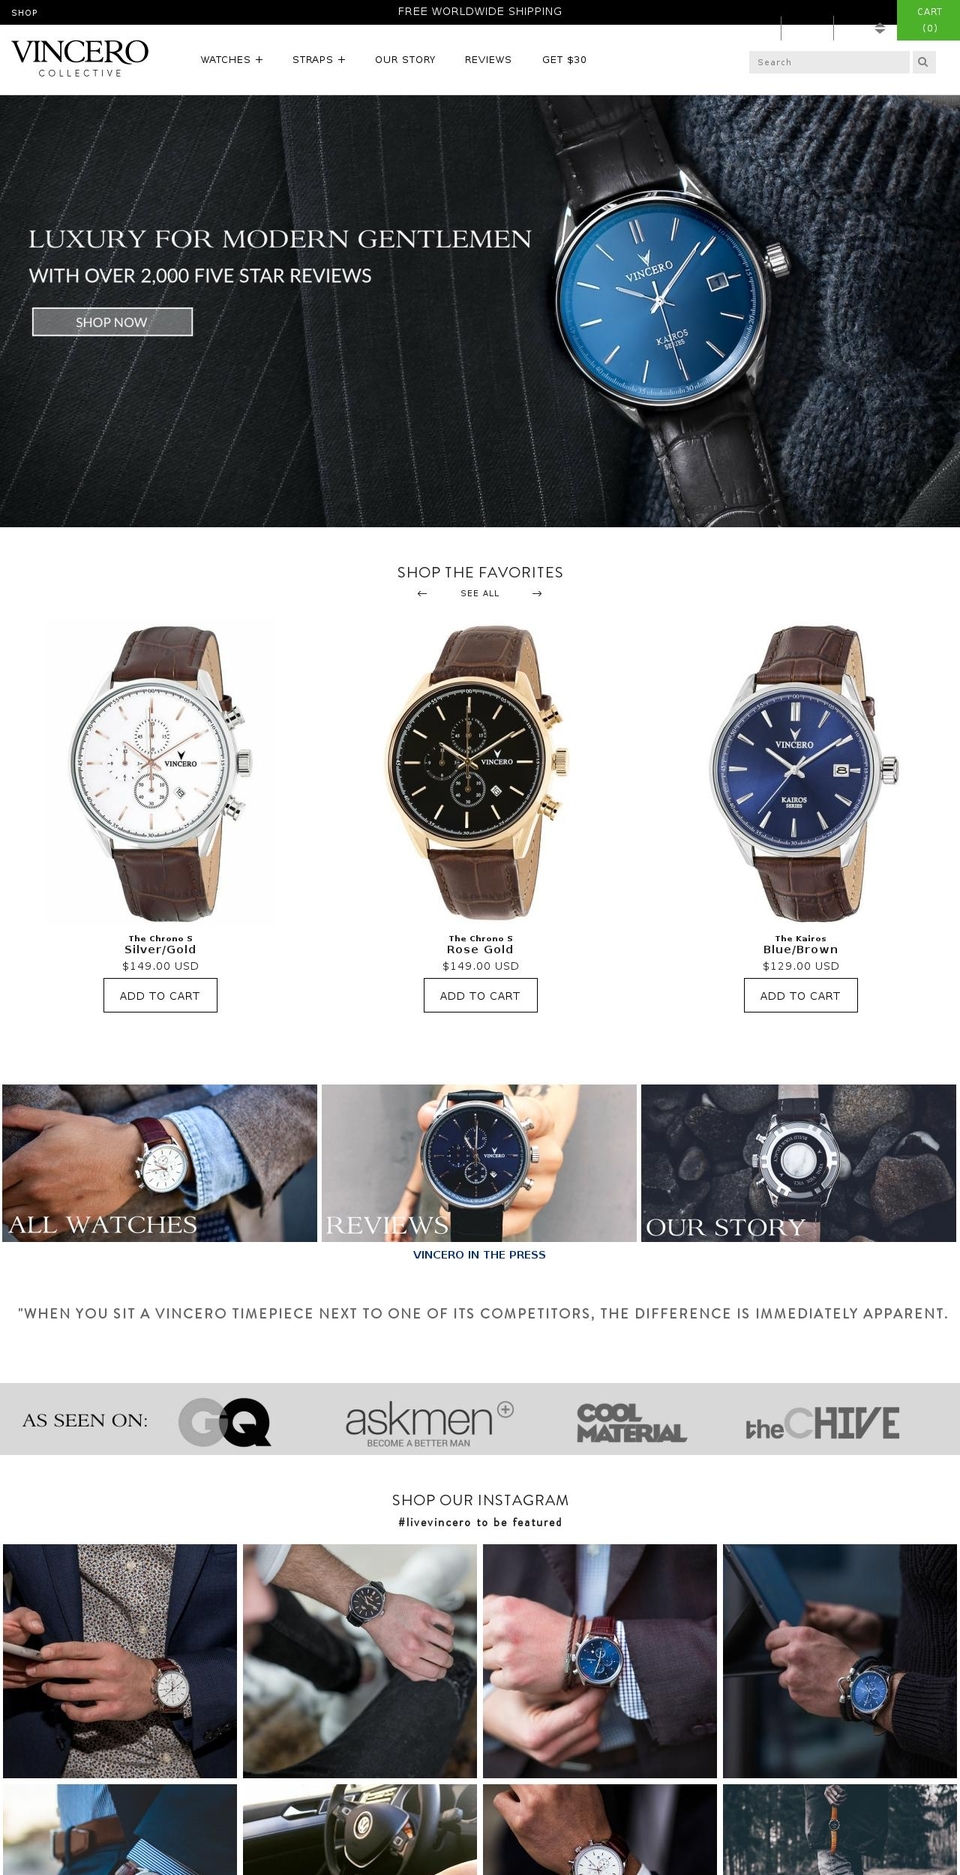 WATCHES Shopify theme site example vincerocollective.com